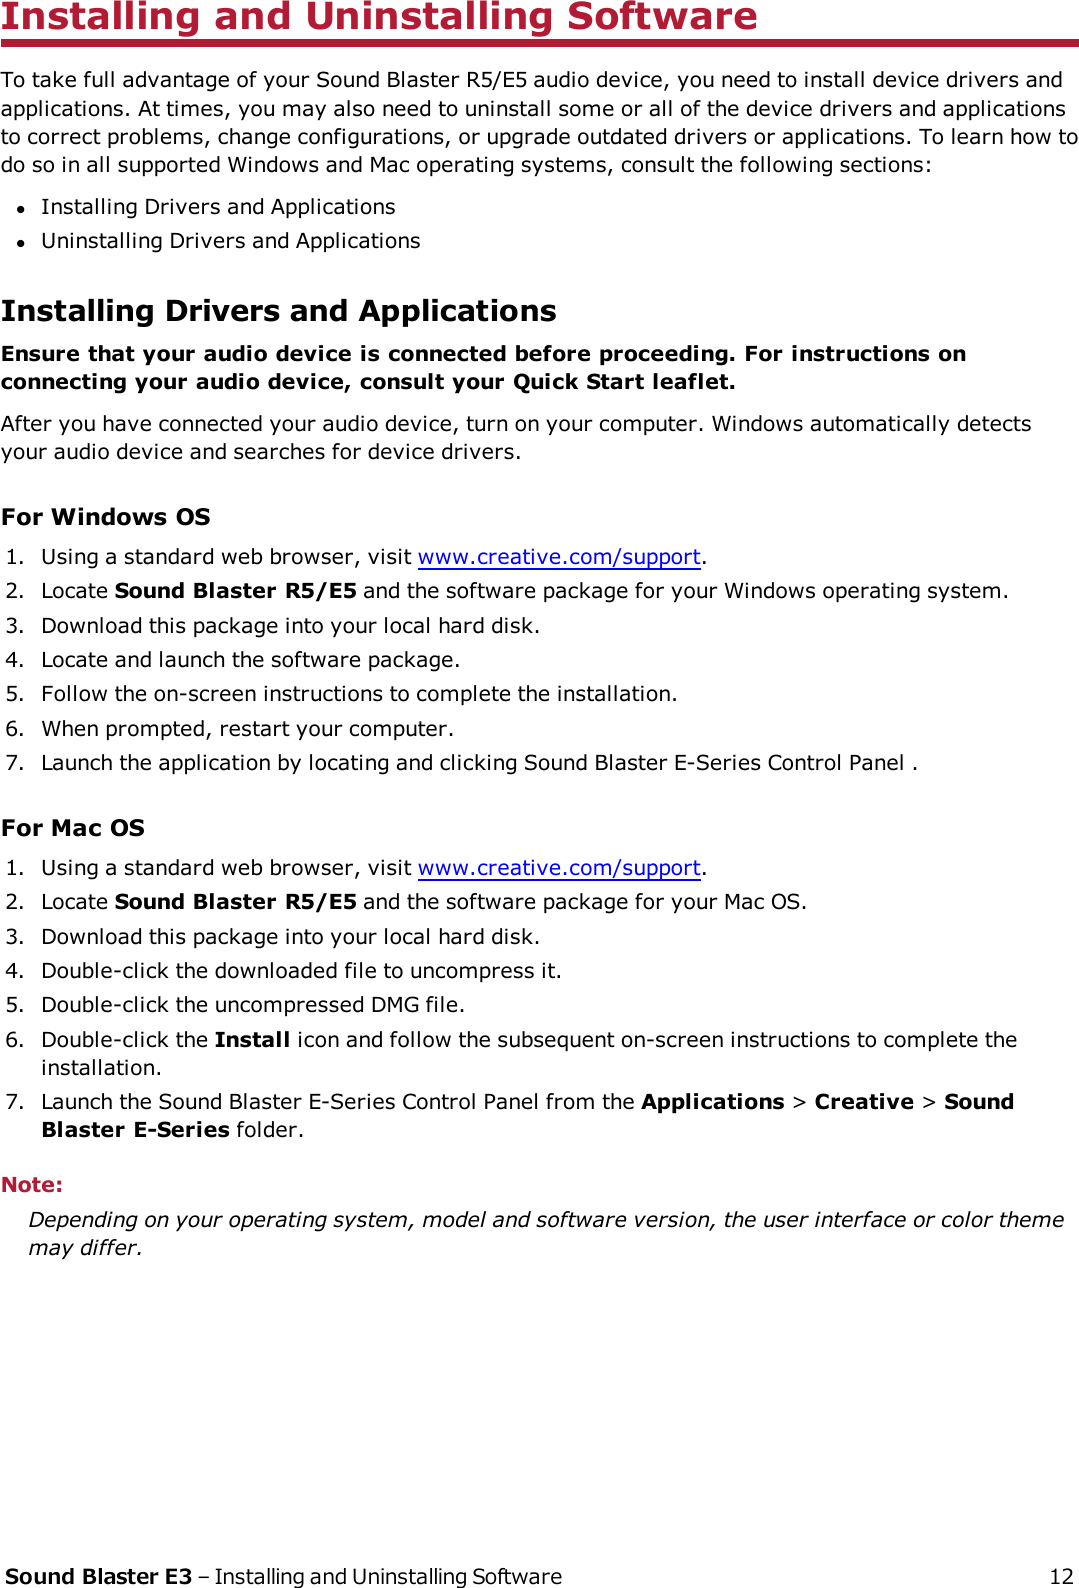 Installing and Uninstalling SoftwareTo take full advantage of your Sound Blaster R5/E5 audio device, you need to install device drivers andapplications. At times, you may also need to uninstall some or all of the device drivers and applicationsto correct problems, change configurations, or upgrade outdated drivers or applications. To learn how todo so in all supported Windows and Mac operating systems, consult the following sections:lInstalling Drivers and ApplicationslUninstalling Drivers and ApplicationsInstalling Drivers and ApplicationsEnsure that your audio device is connected before proceeding. For instructions onconnecting your audio device, consult your Quick Start leaflet.After you have connected your audio device, turn on your computer. Windows automatically detectsyour audio device and searches for device drivers.For Windows OS1. Using a standard web browser, visit www.creative.com/support.2. Locate Sound Blaster R5/E5 and the software package for your Windows operating system.3. Download this package into your local hard disk.4. Locate and launch the software package.5. Follow the on-screen instructions to complete the installation.6. When prompted, restart your computer.7. Launch the application by locating and clicking Sound Blaster E-Series Control Panel .For Mac OS1. Using a standard web browser, visit www.creative.com/support.2. Locate Sound Blaster R5/E5 and the software package for your Mac OS.3. Download this package into your local hard disk.4. Double-click the downloaded file to uncompress it.5. Double-click the uncompressed DMG file.6. Double-click the Install icon and follow the subsequent on-screen instructions to complete theinstallation.7. Launch the Sound Blaster E-Series Control Panel from the Applications &gt;Creative &gt;SoundBlaster E-Series folder.Note:Depending on your operating system, model and software version, the user interface or color thememay differ.Sound Blaster E3 – Installing and Uninstalling Software 12